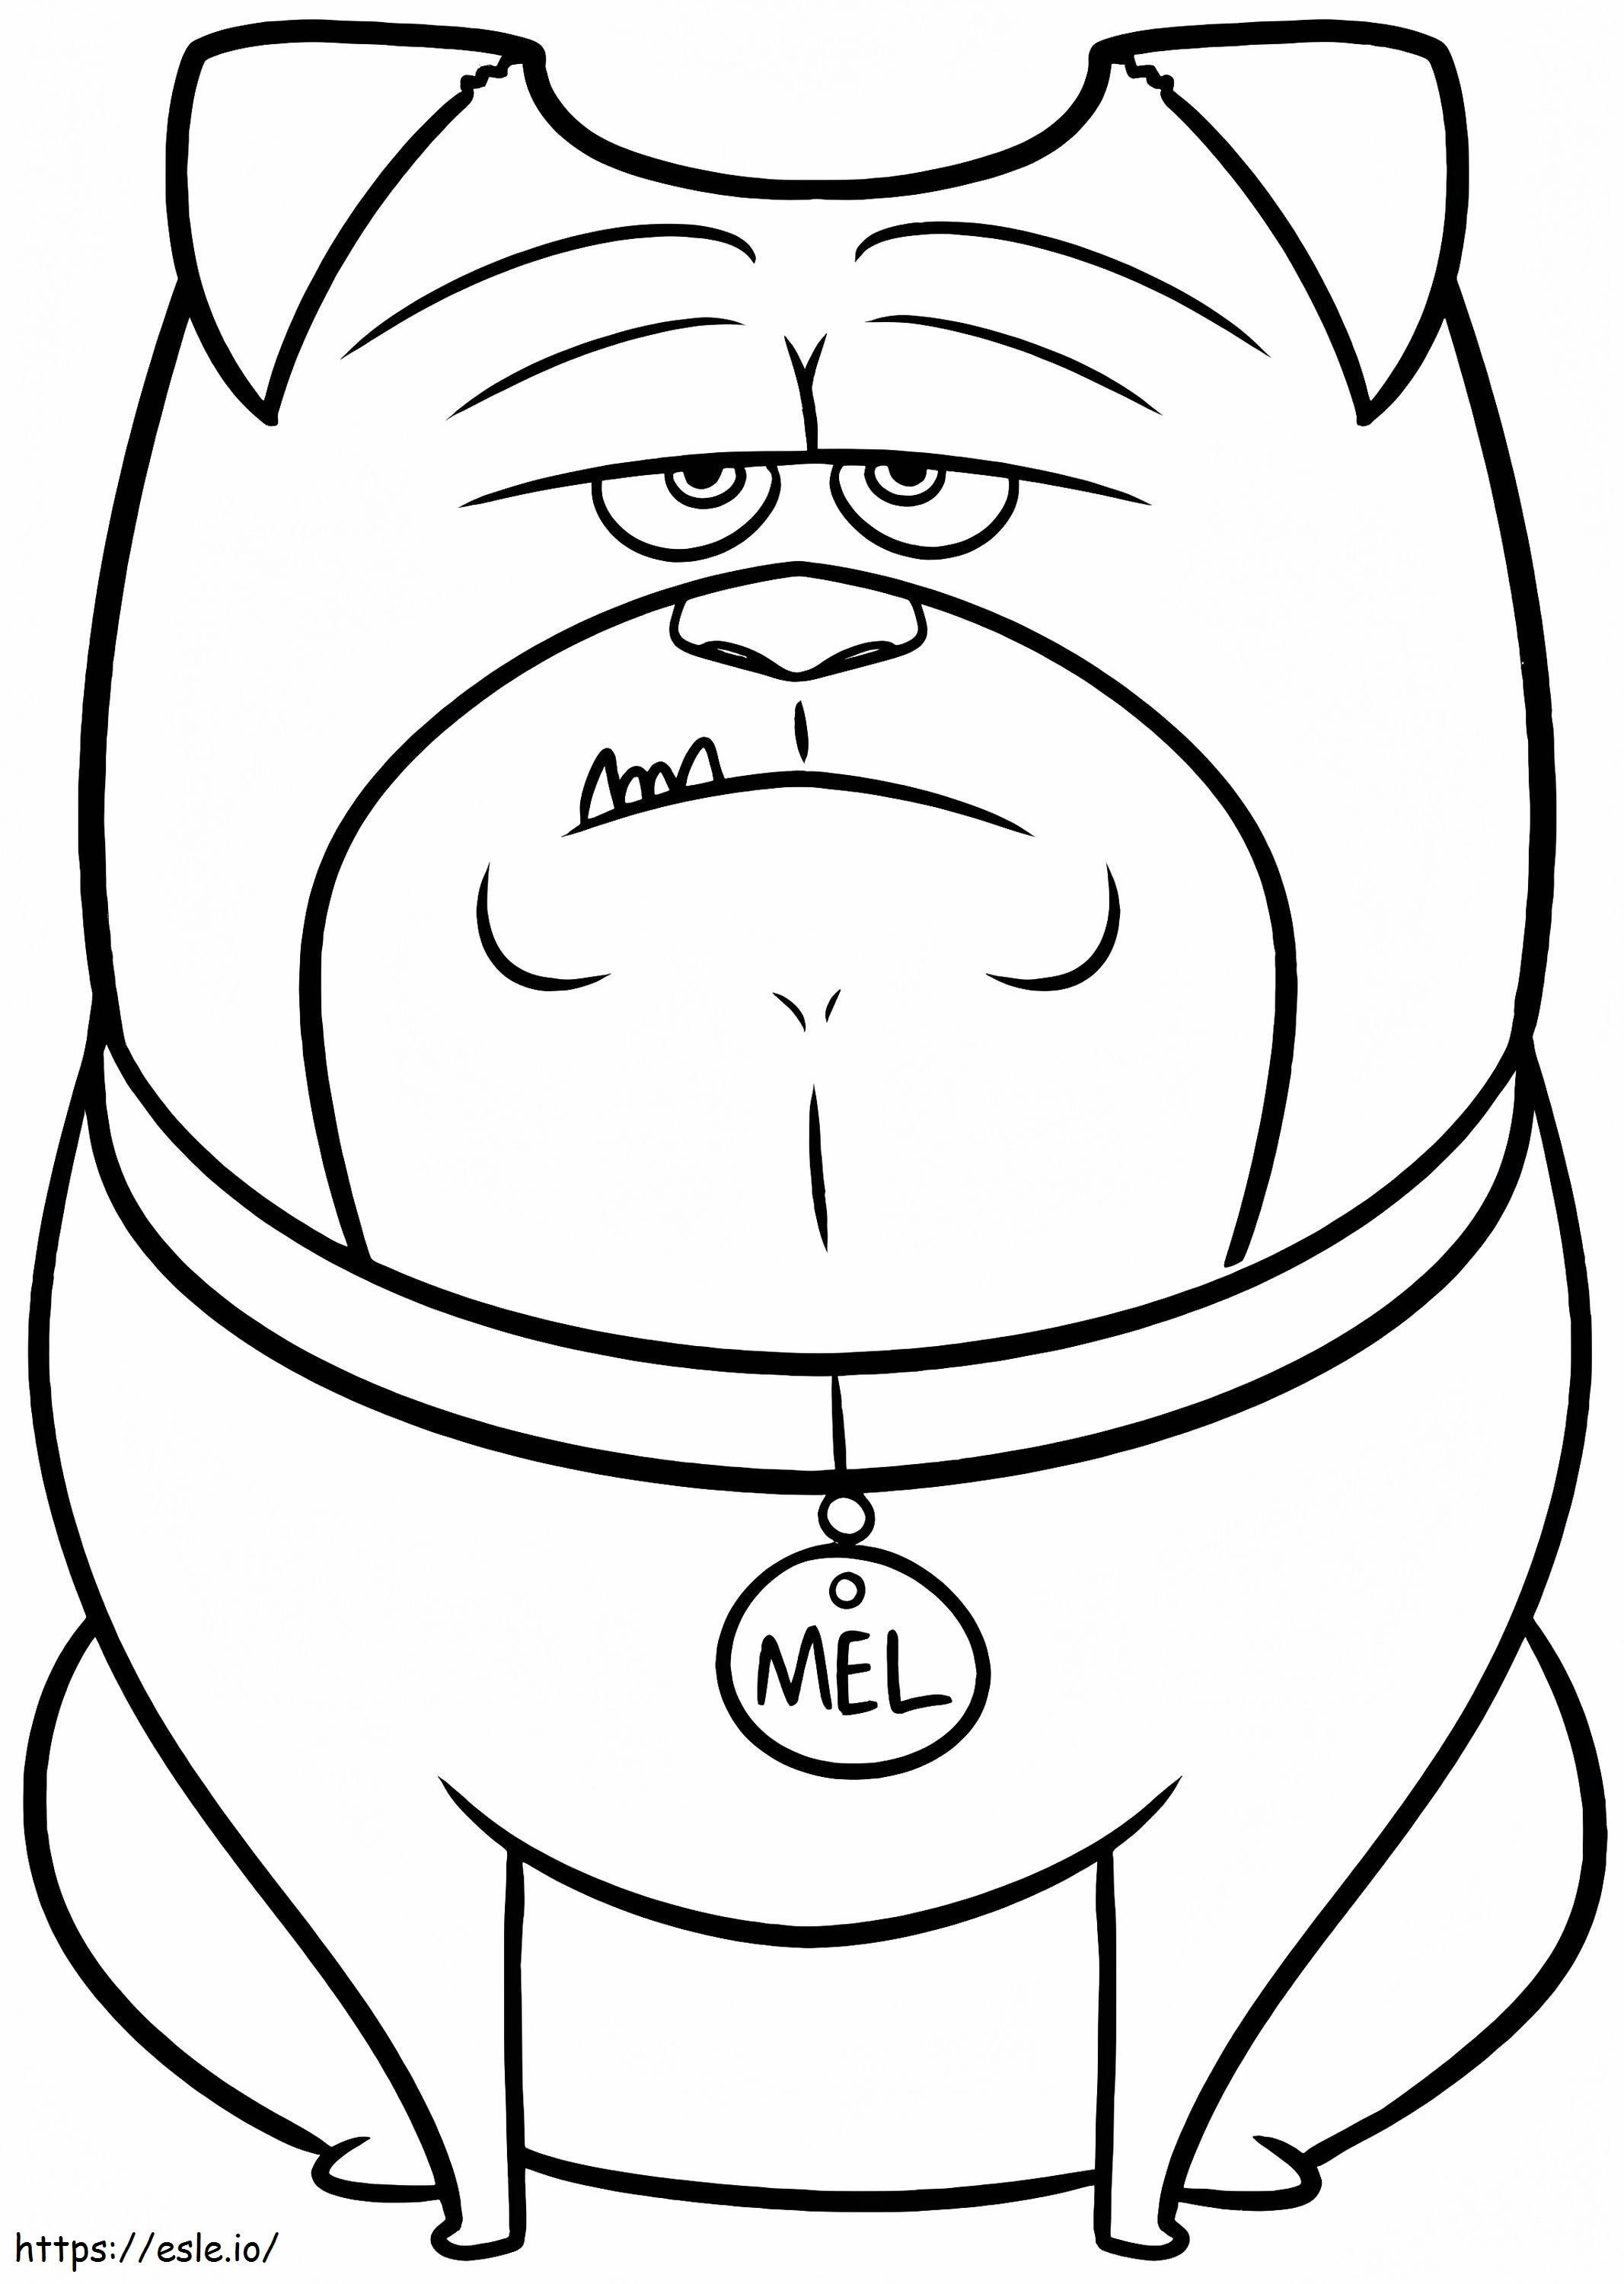 1559612929 Mel A4 coloring page